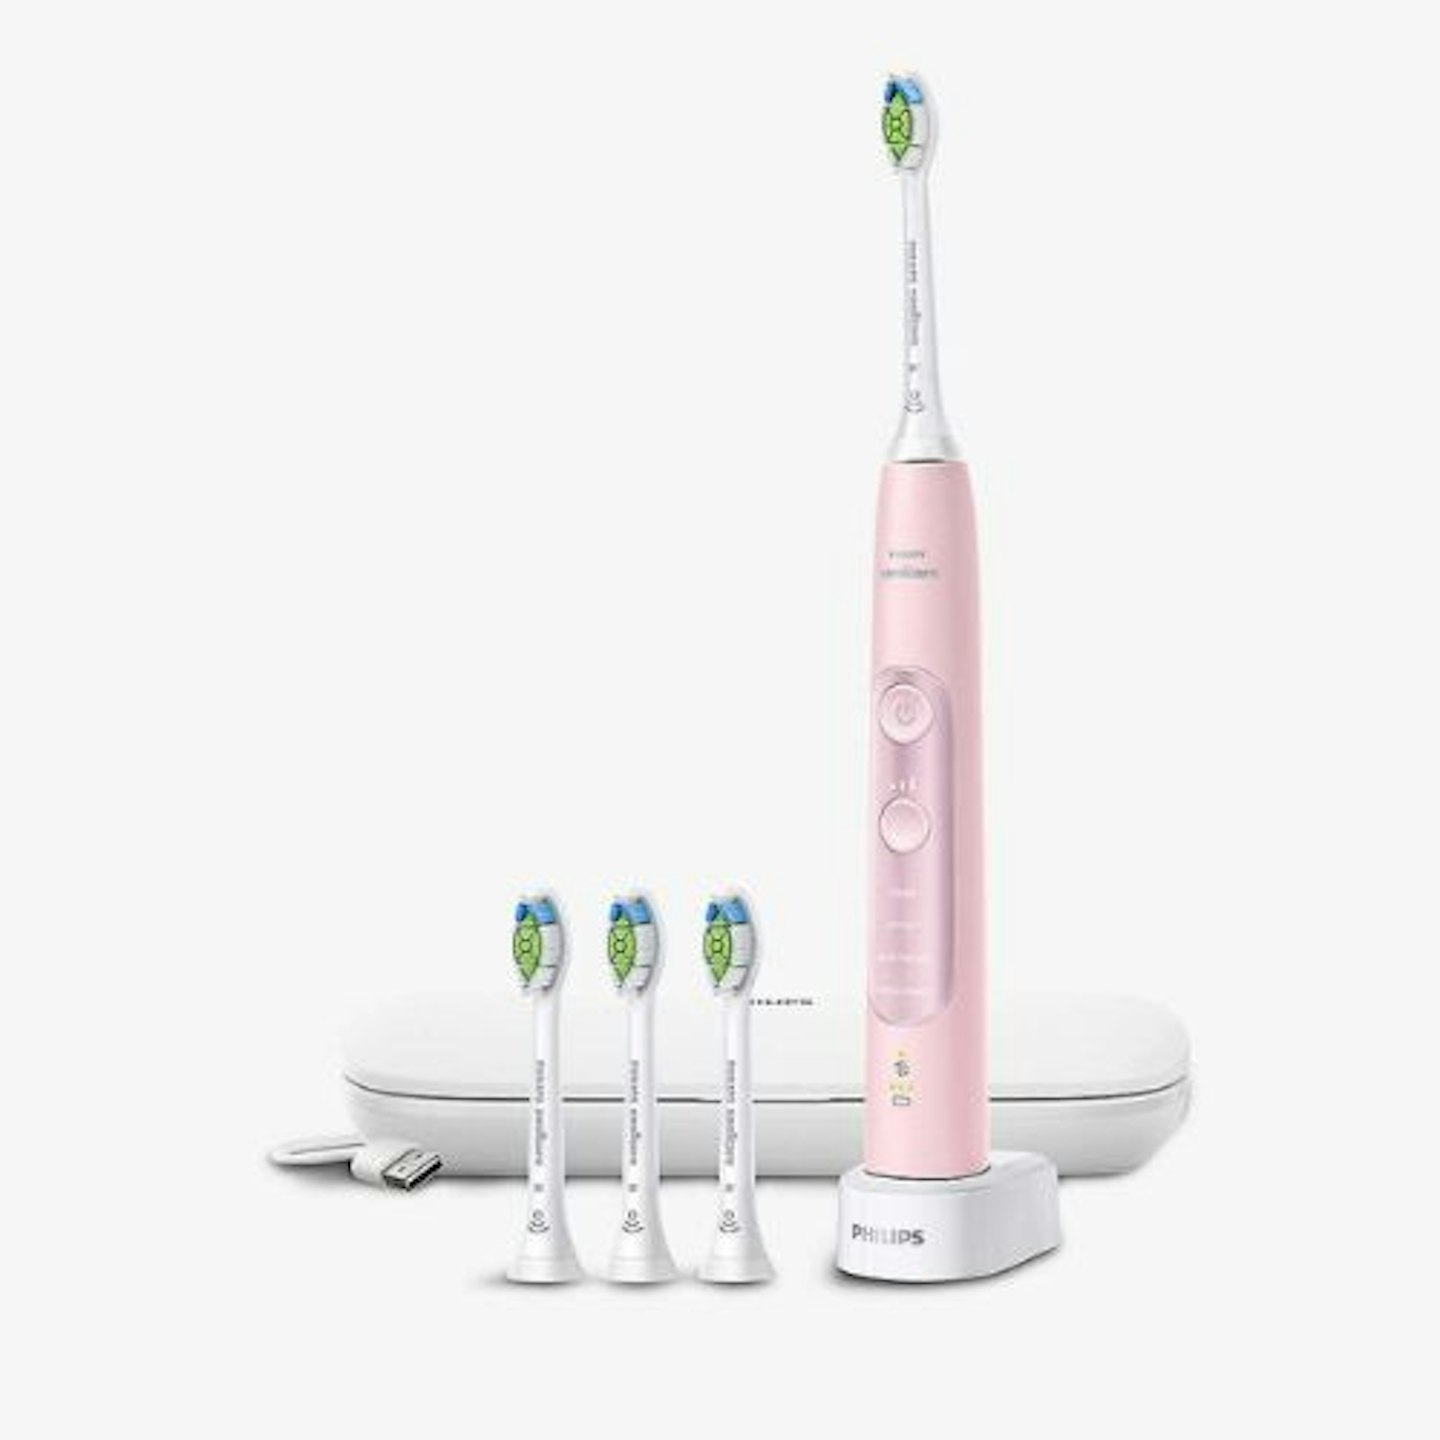 SoniCare 7900 Electric Toothbrush